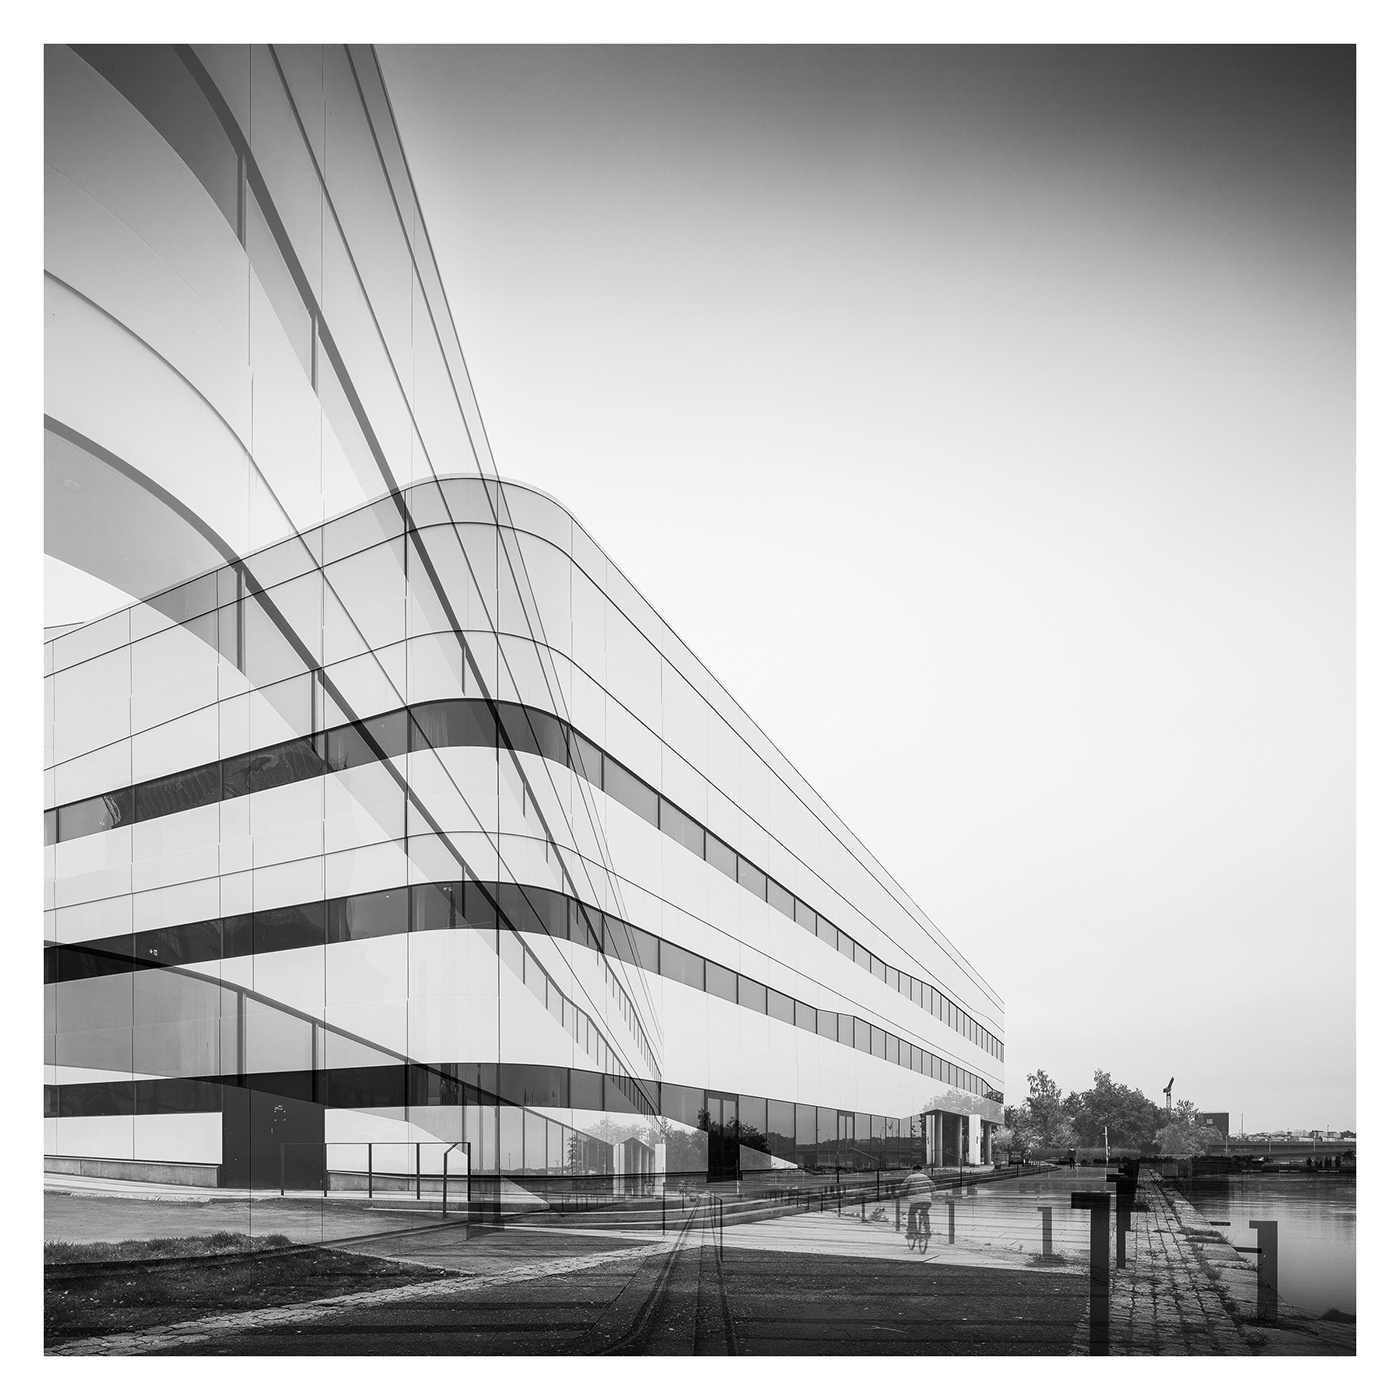 abstractions Architectural Abstracts architecture B&W Architecture composites peterjsieger PJSdblviews sieger